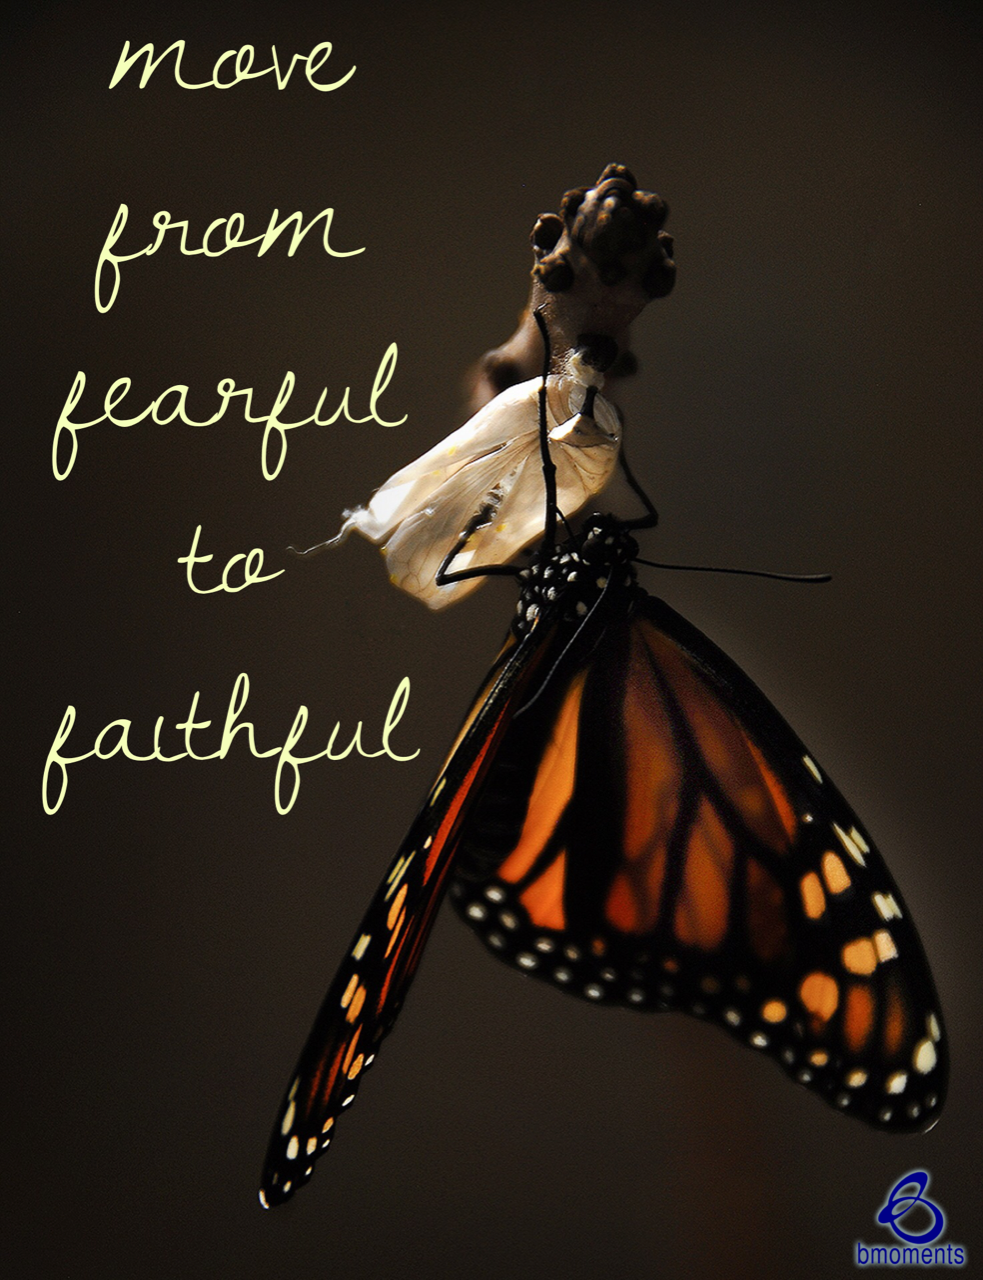 Be Courageous: Move from Fearful to Faithful